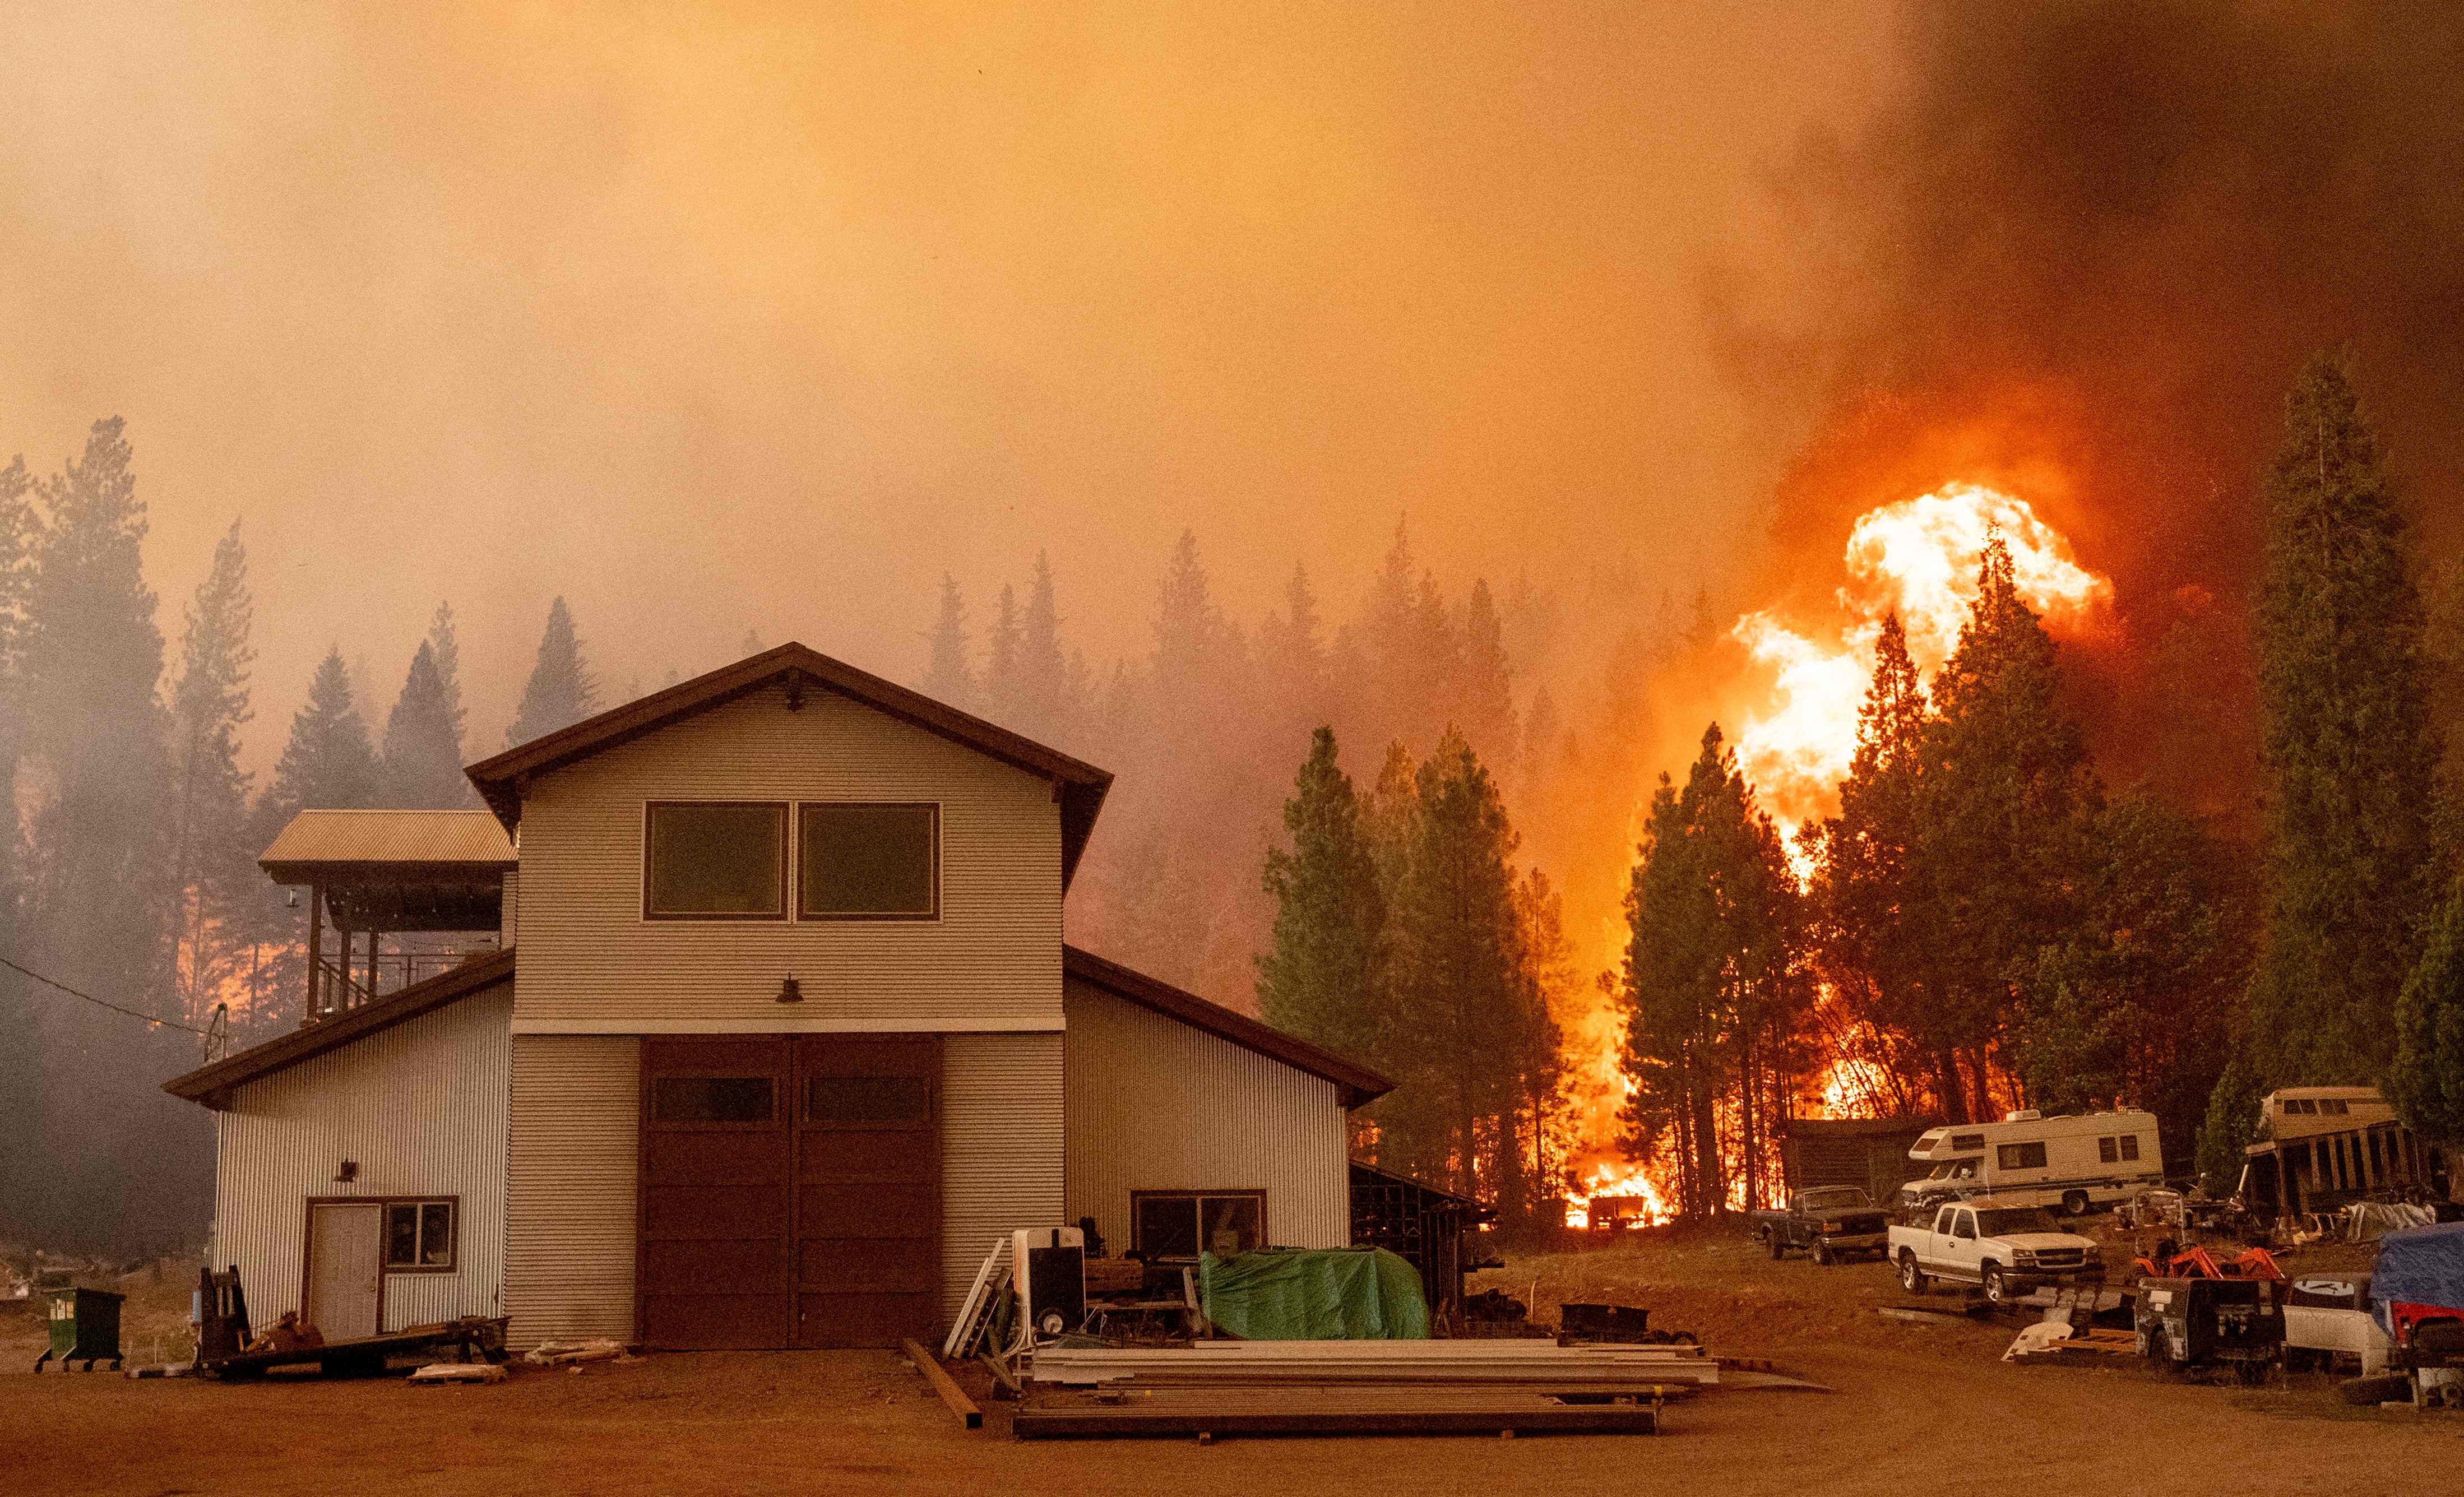 Extreme weather events: wildfires have been raging around the world